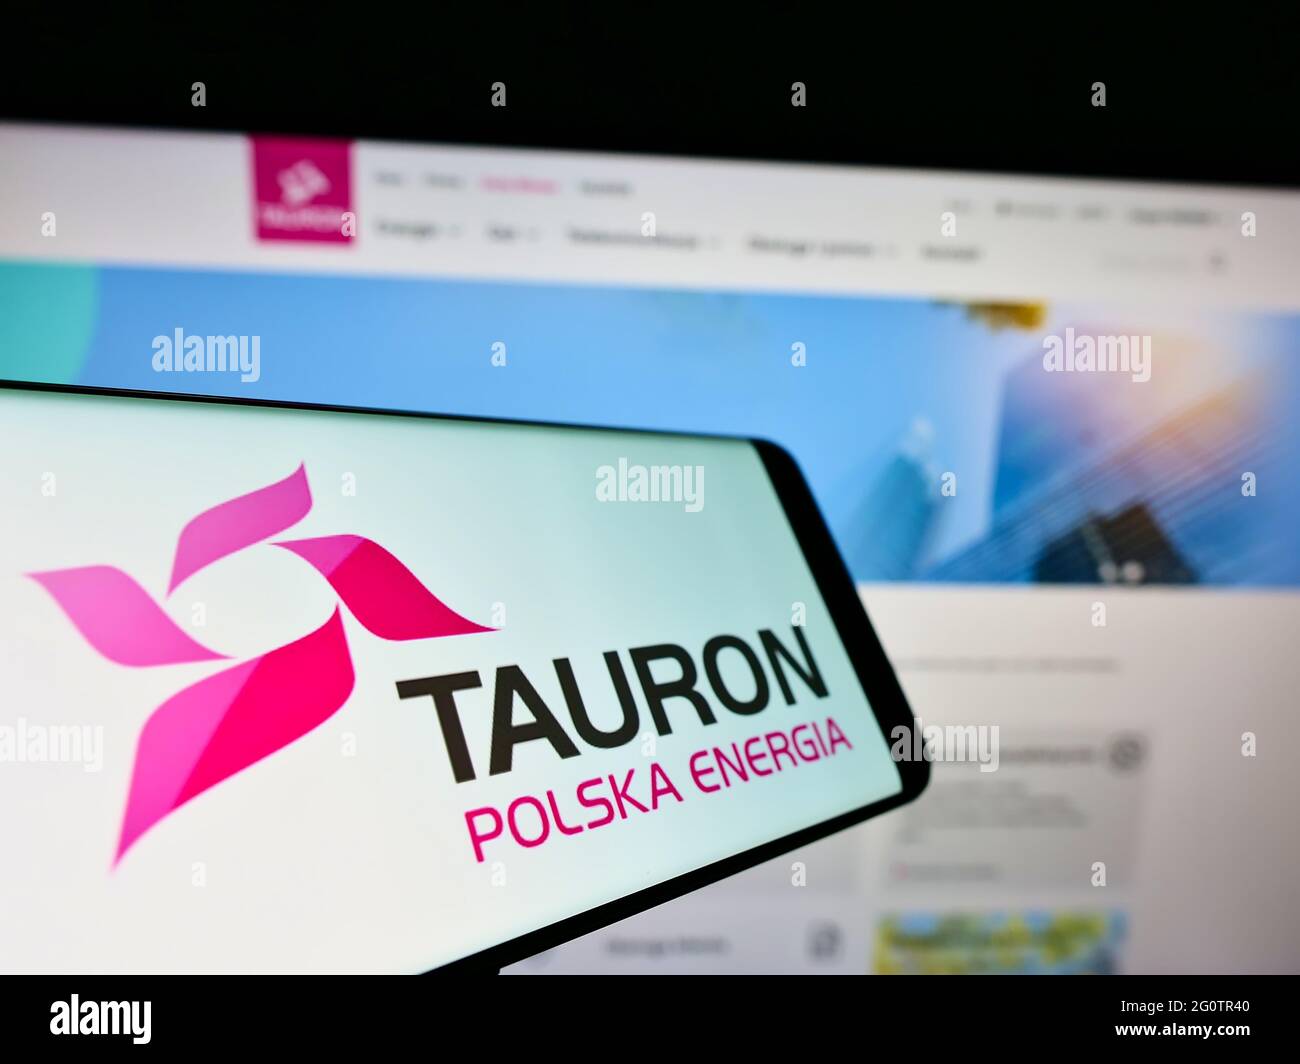 Mobile phone with logo of Polish energy company Tauron Polska Energia S.A. on screen in front of website. Focus on center-right of phone display. Stock Photo